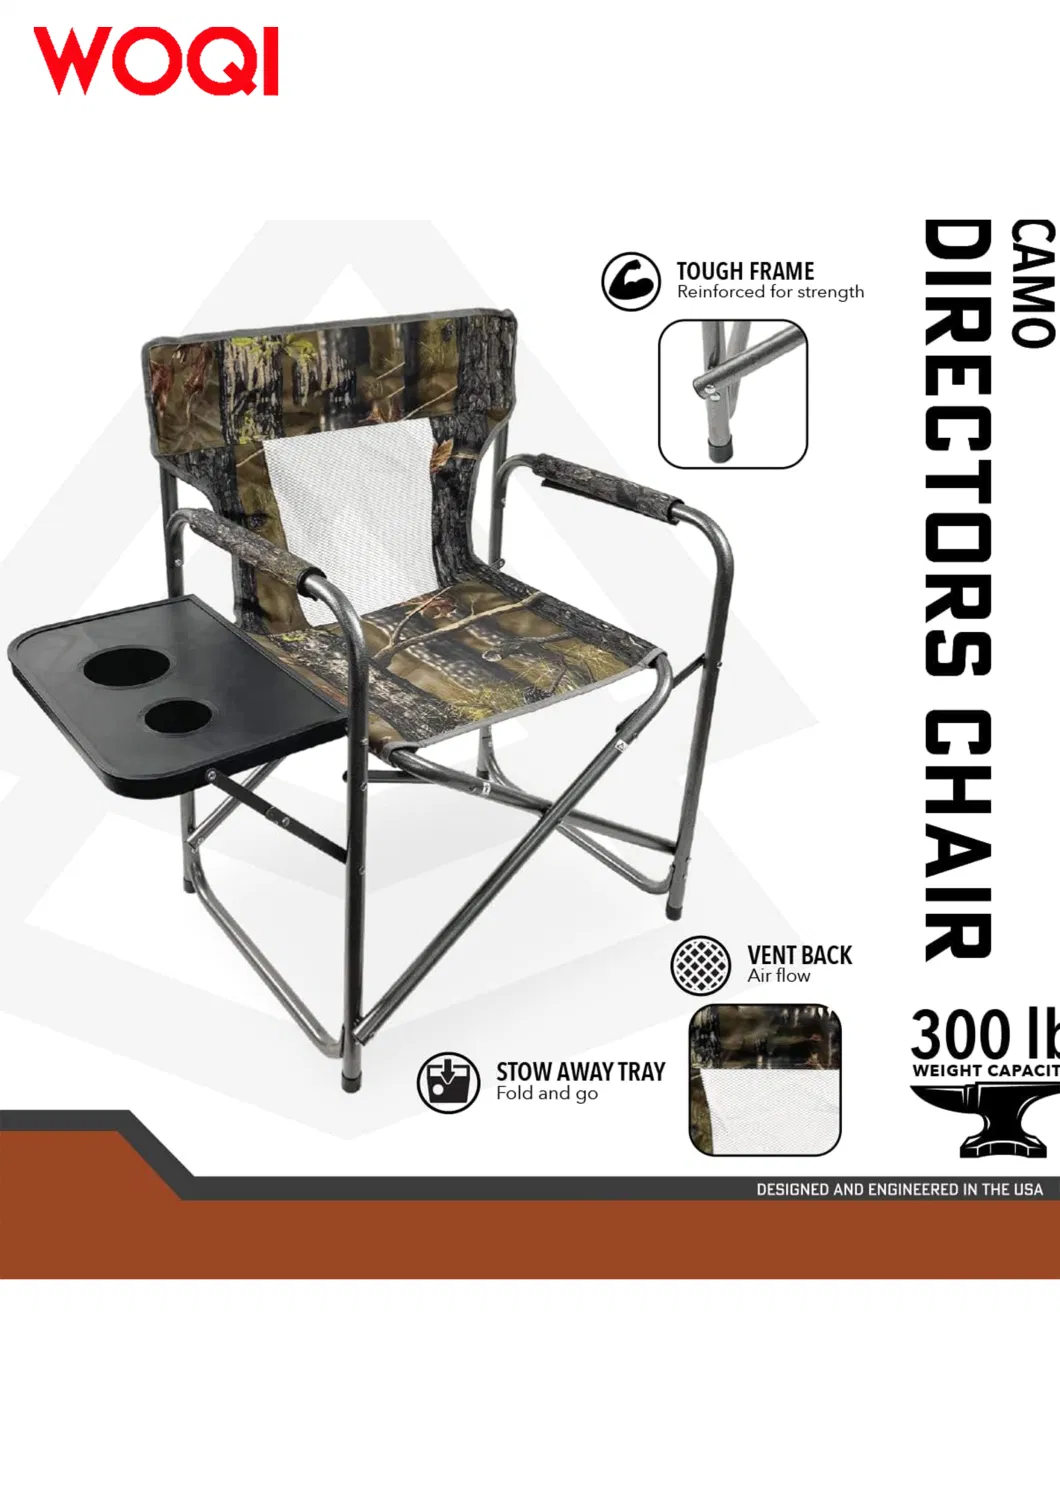 Woqi Camping Chair with Side Table, Foldable Outdoor Terrace Chair